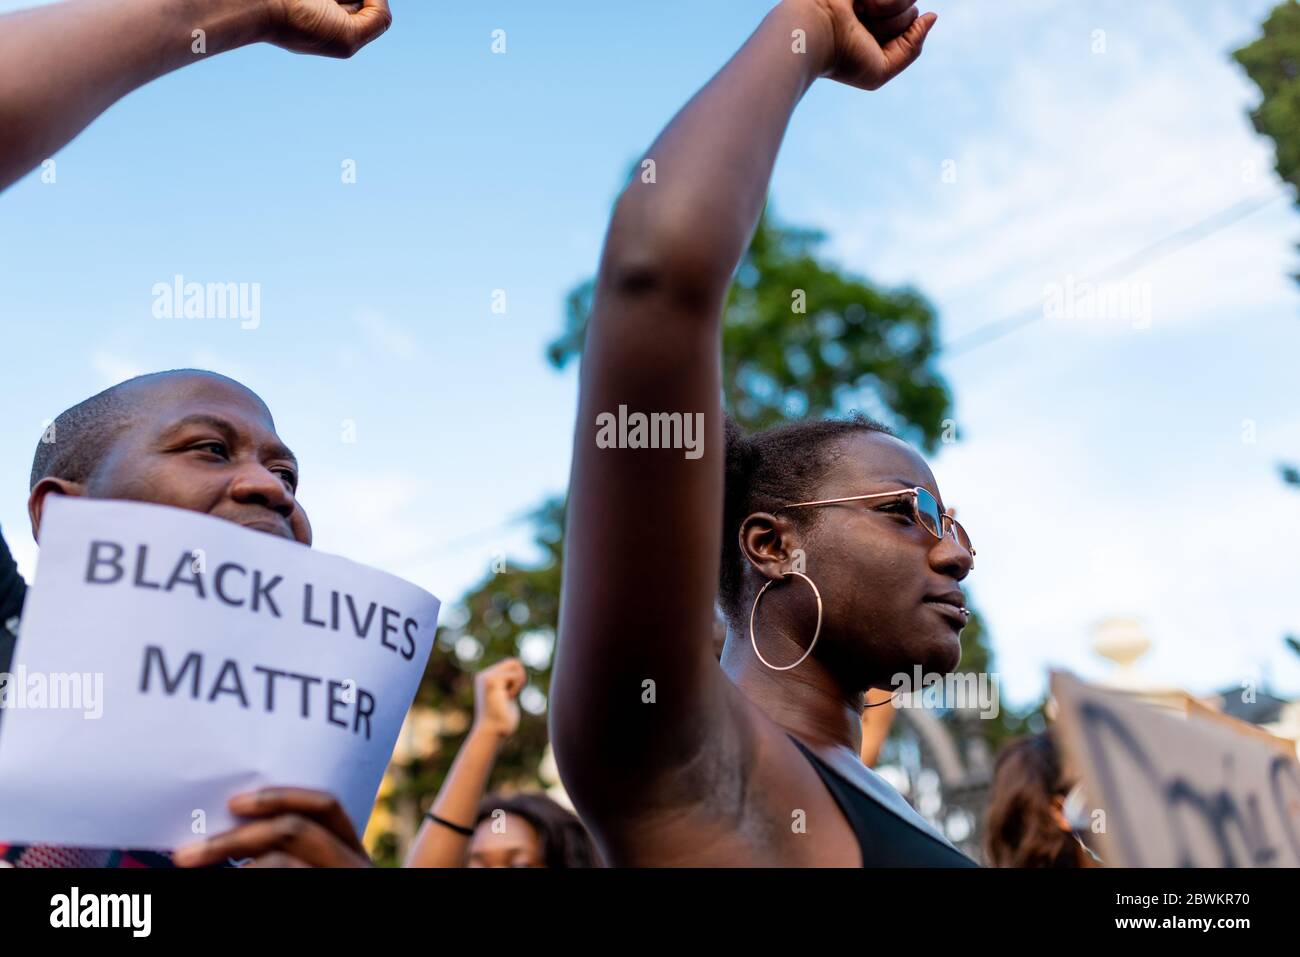 Barcelona, spain - 1 june 2020: Black lives matter movement march in demanding end of police brutality and racism against african-americans and people Stock Photo